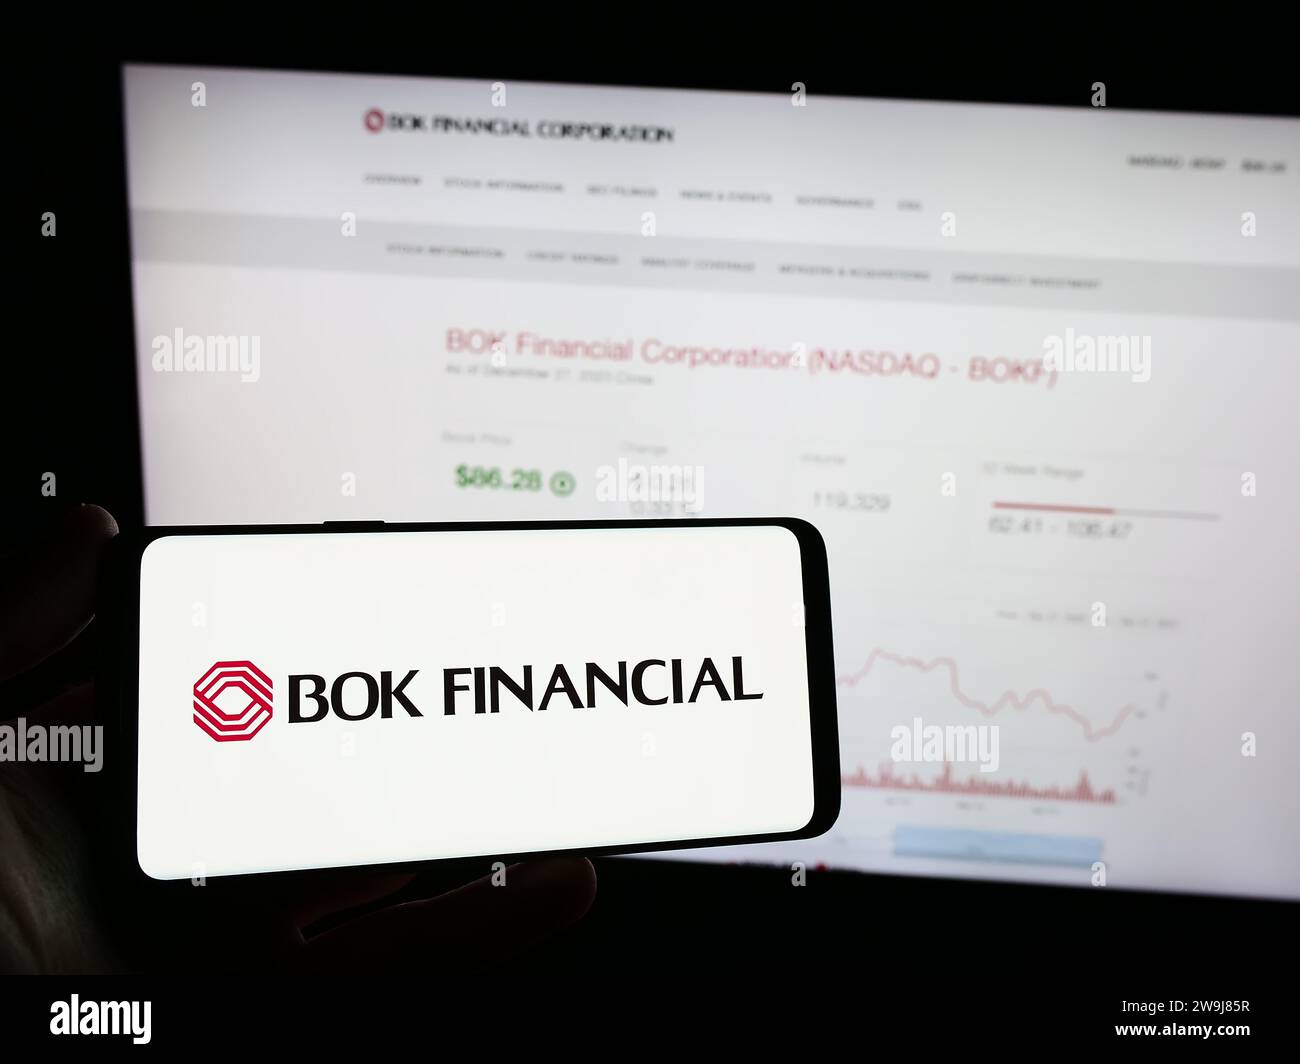 Person holding smartphone with logo of US financial services company BOK Financial Corporation in front of website. Focus on phone display. Stock Photo